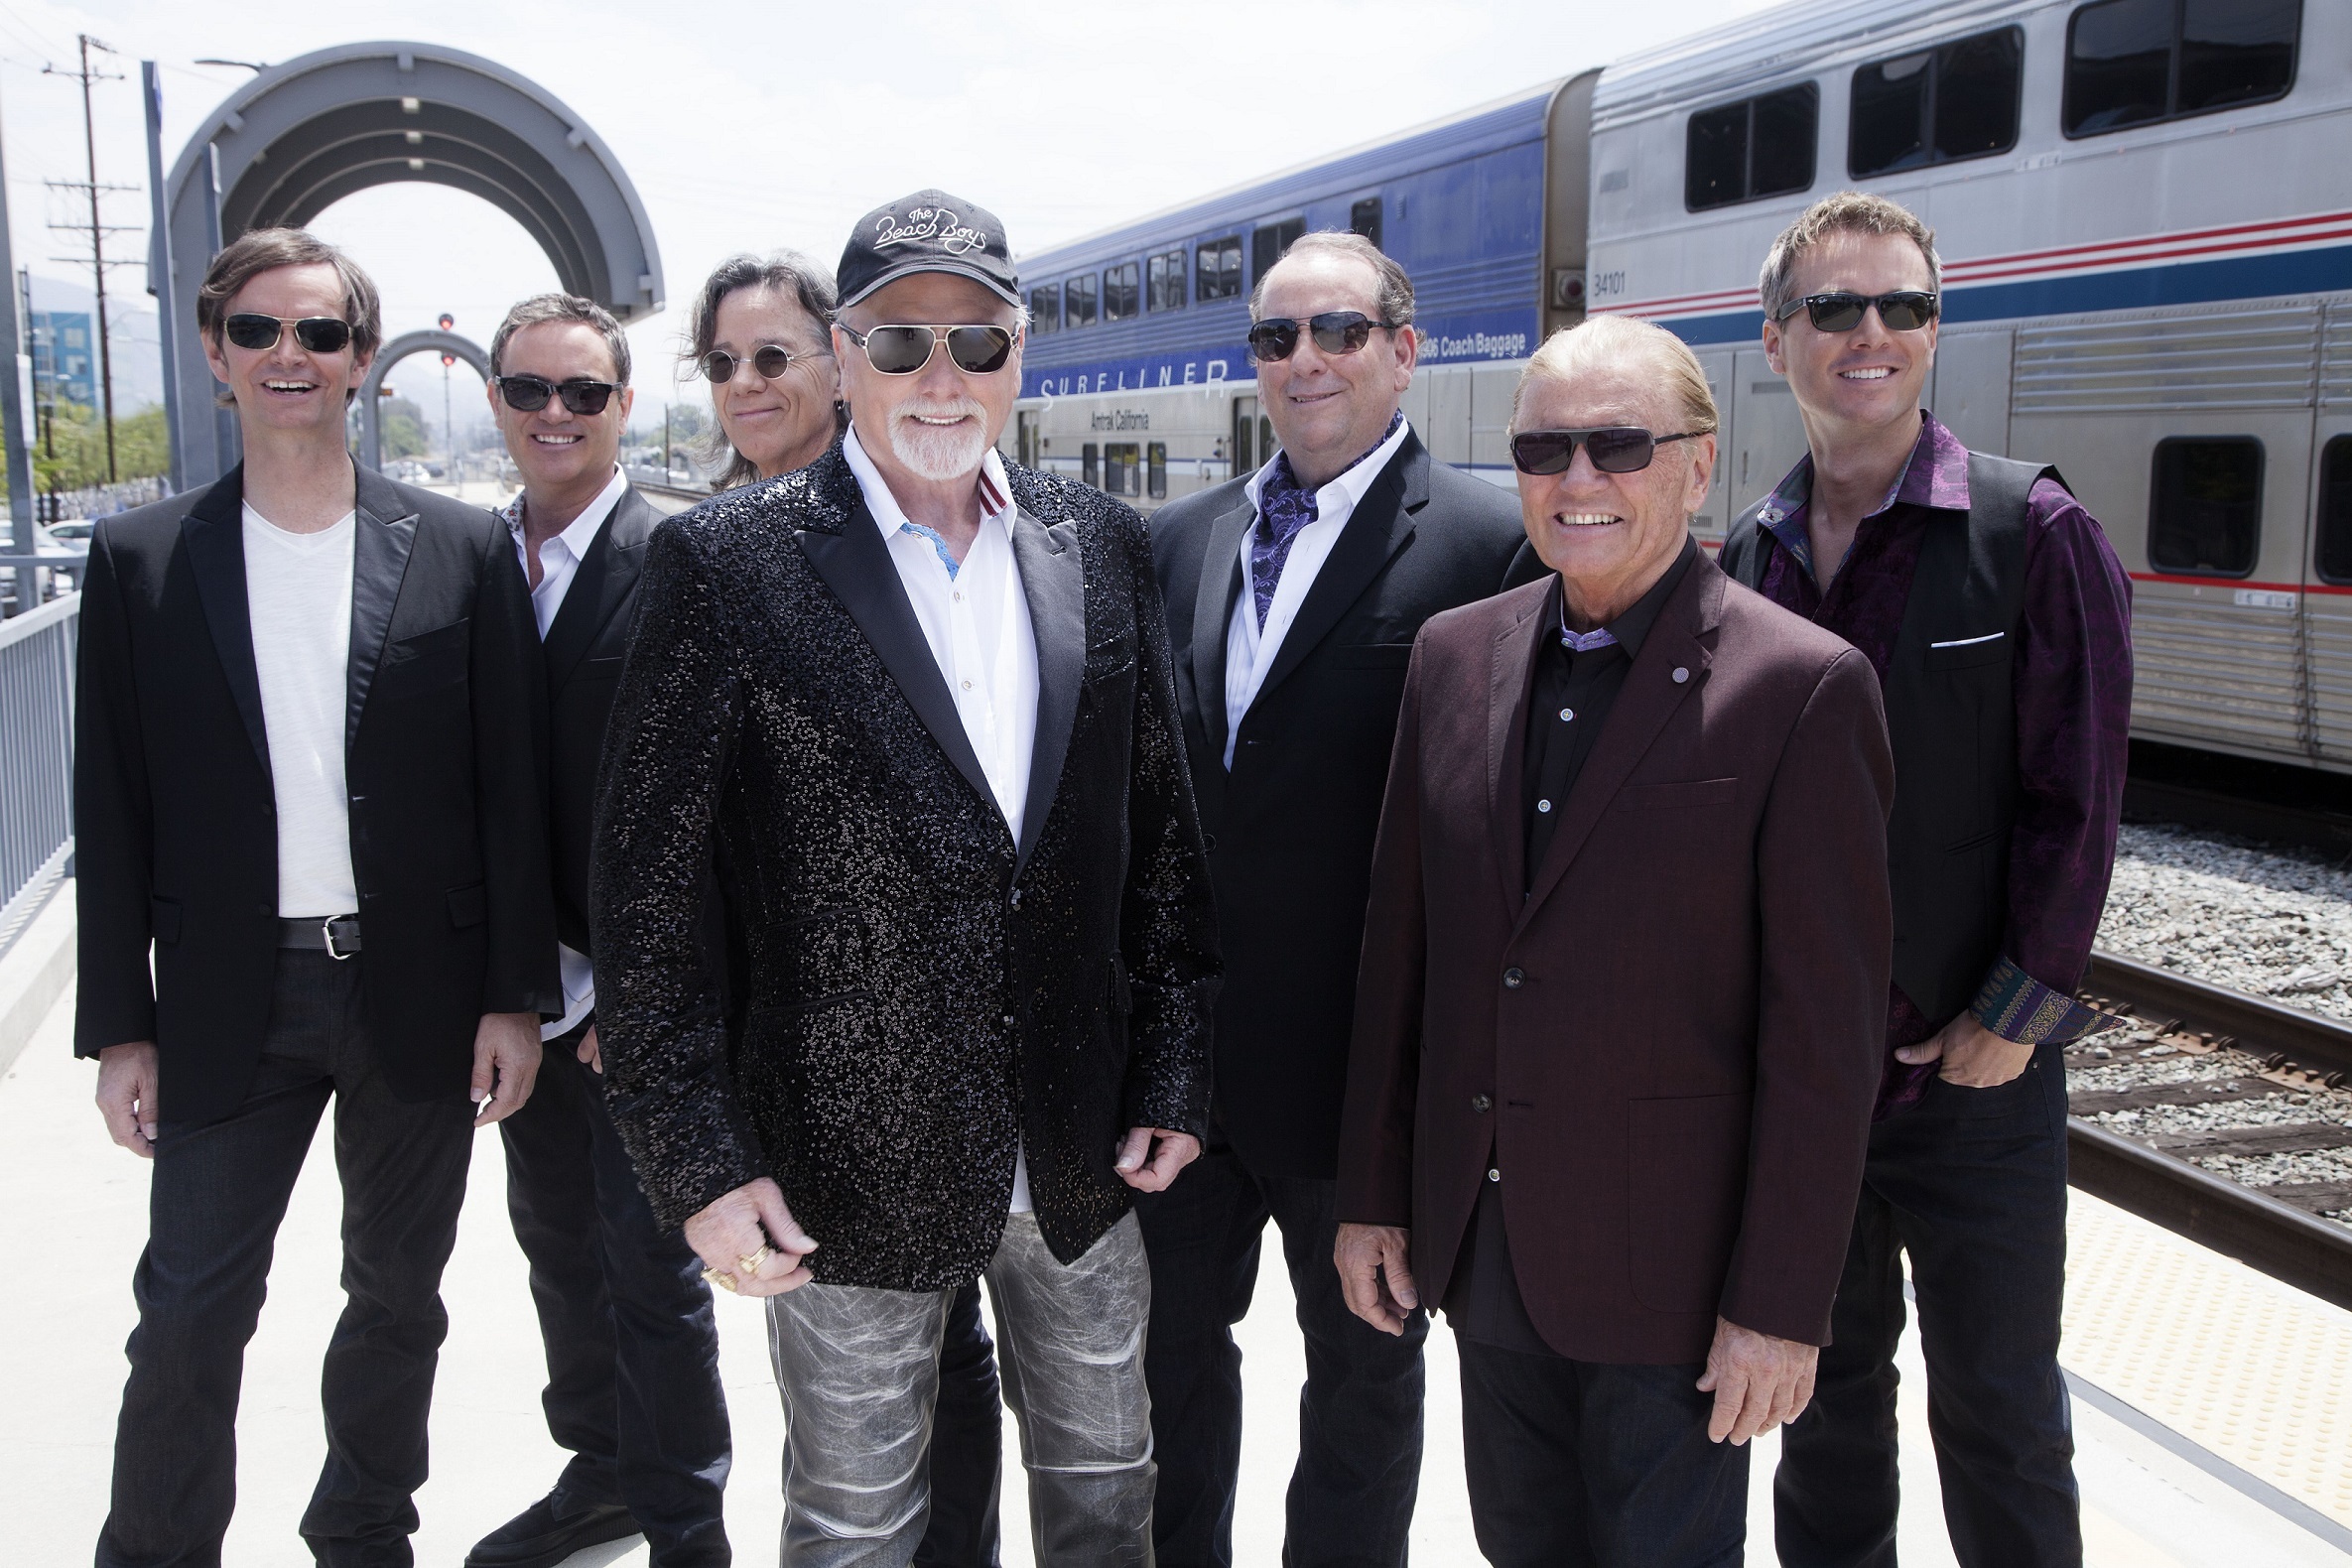 The Beach Boys said they were thrilled to be at Montrose Music Festival